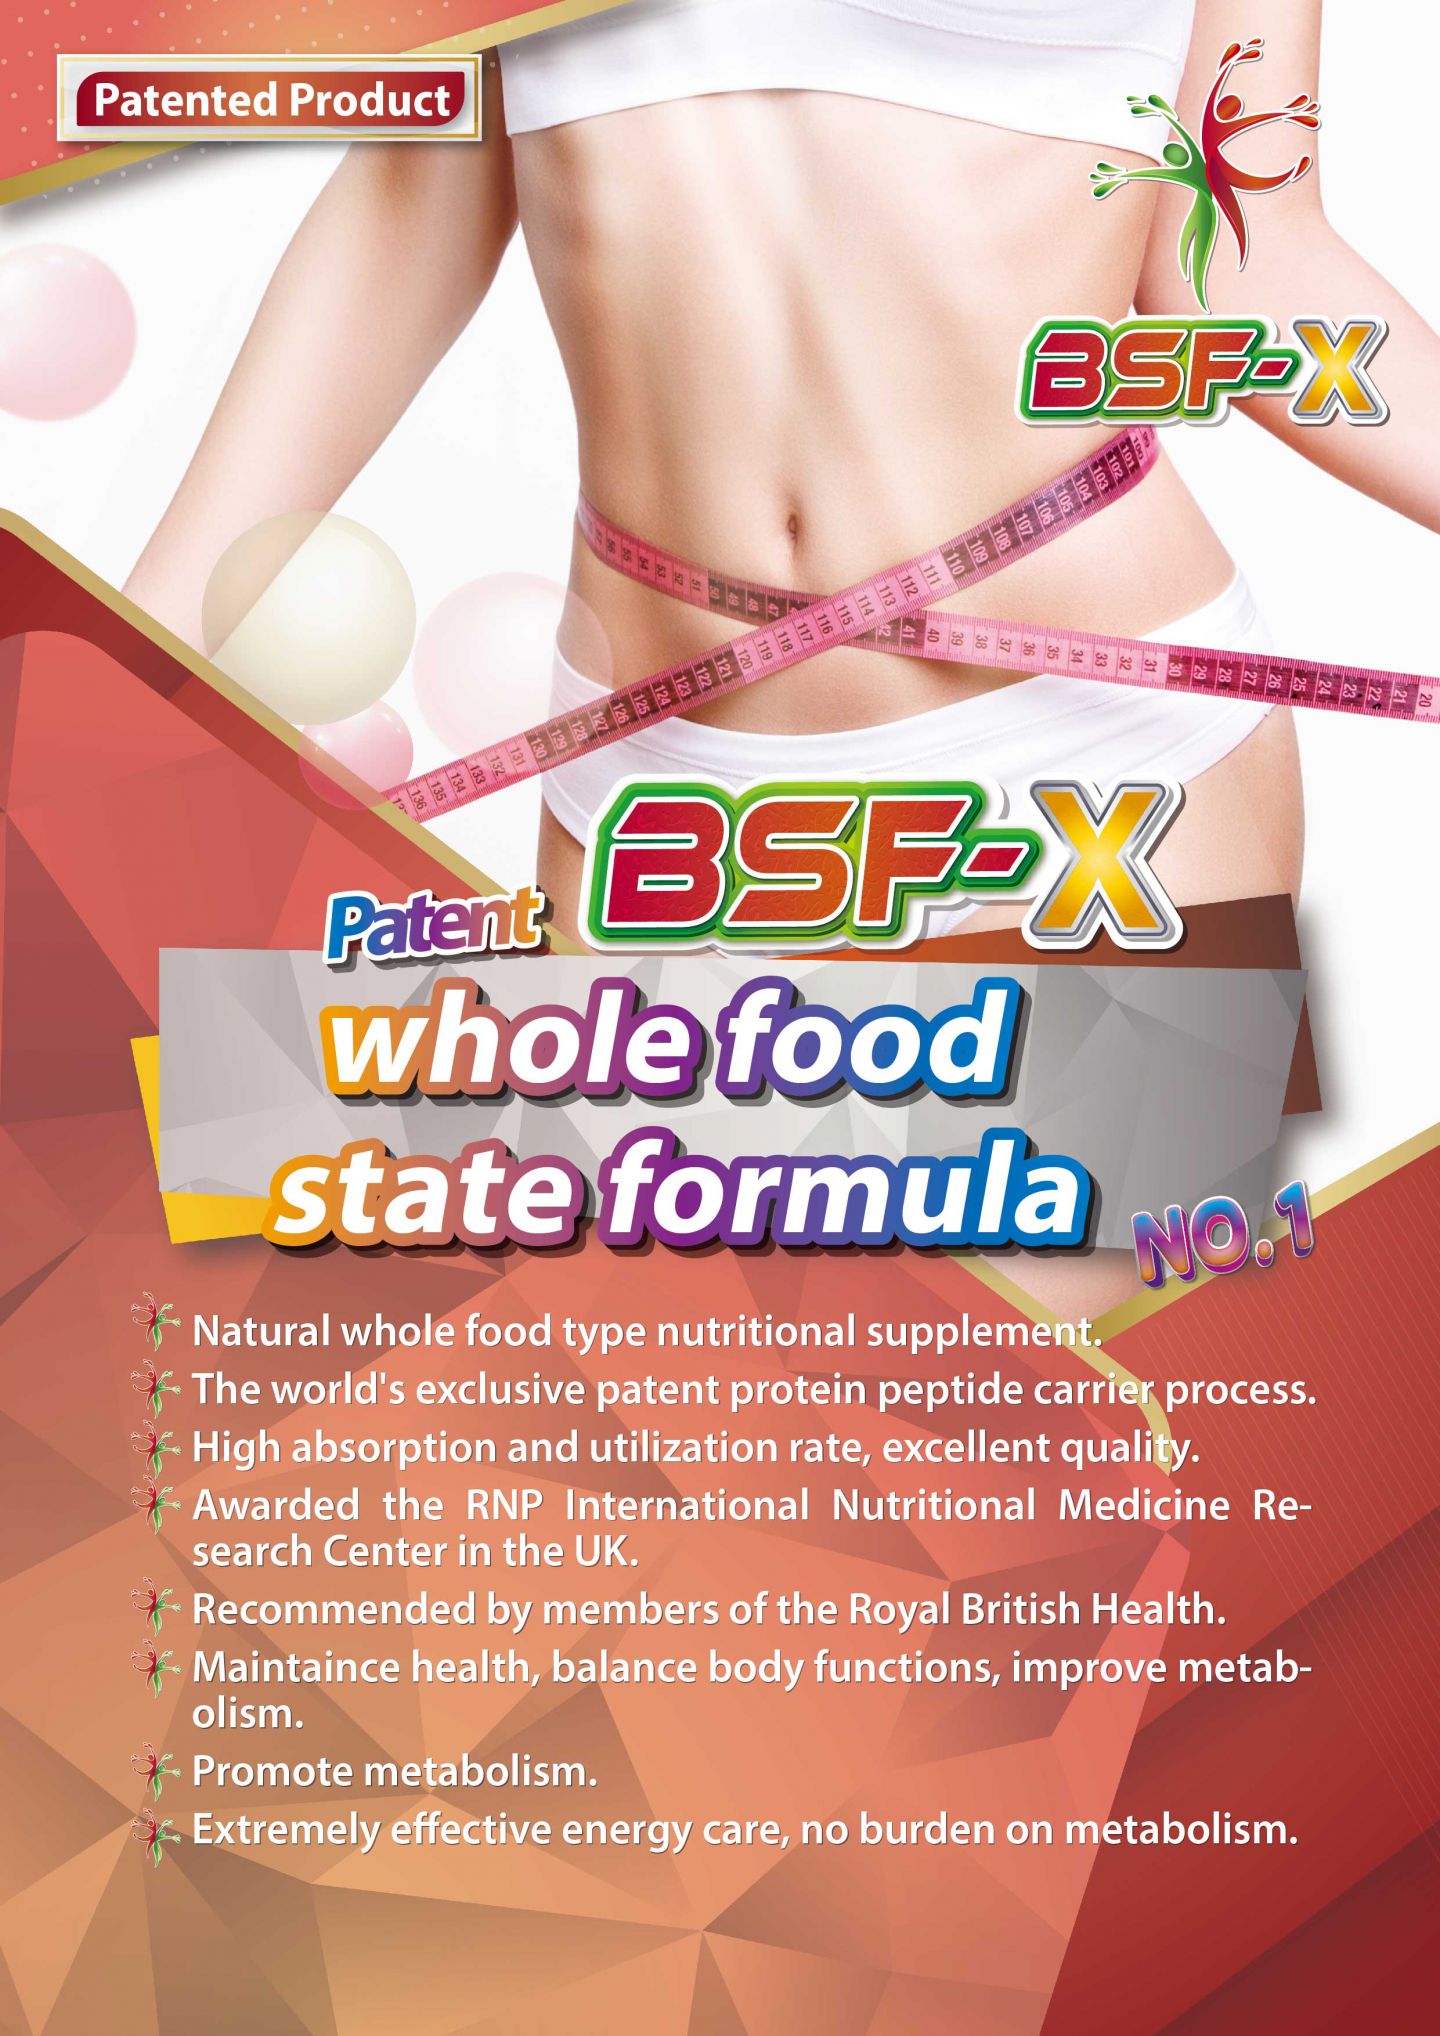 Patent BSF-X whole food state formula